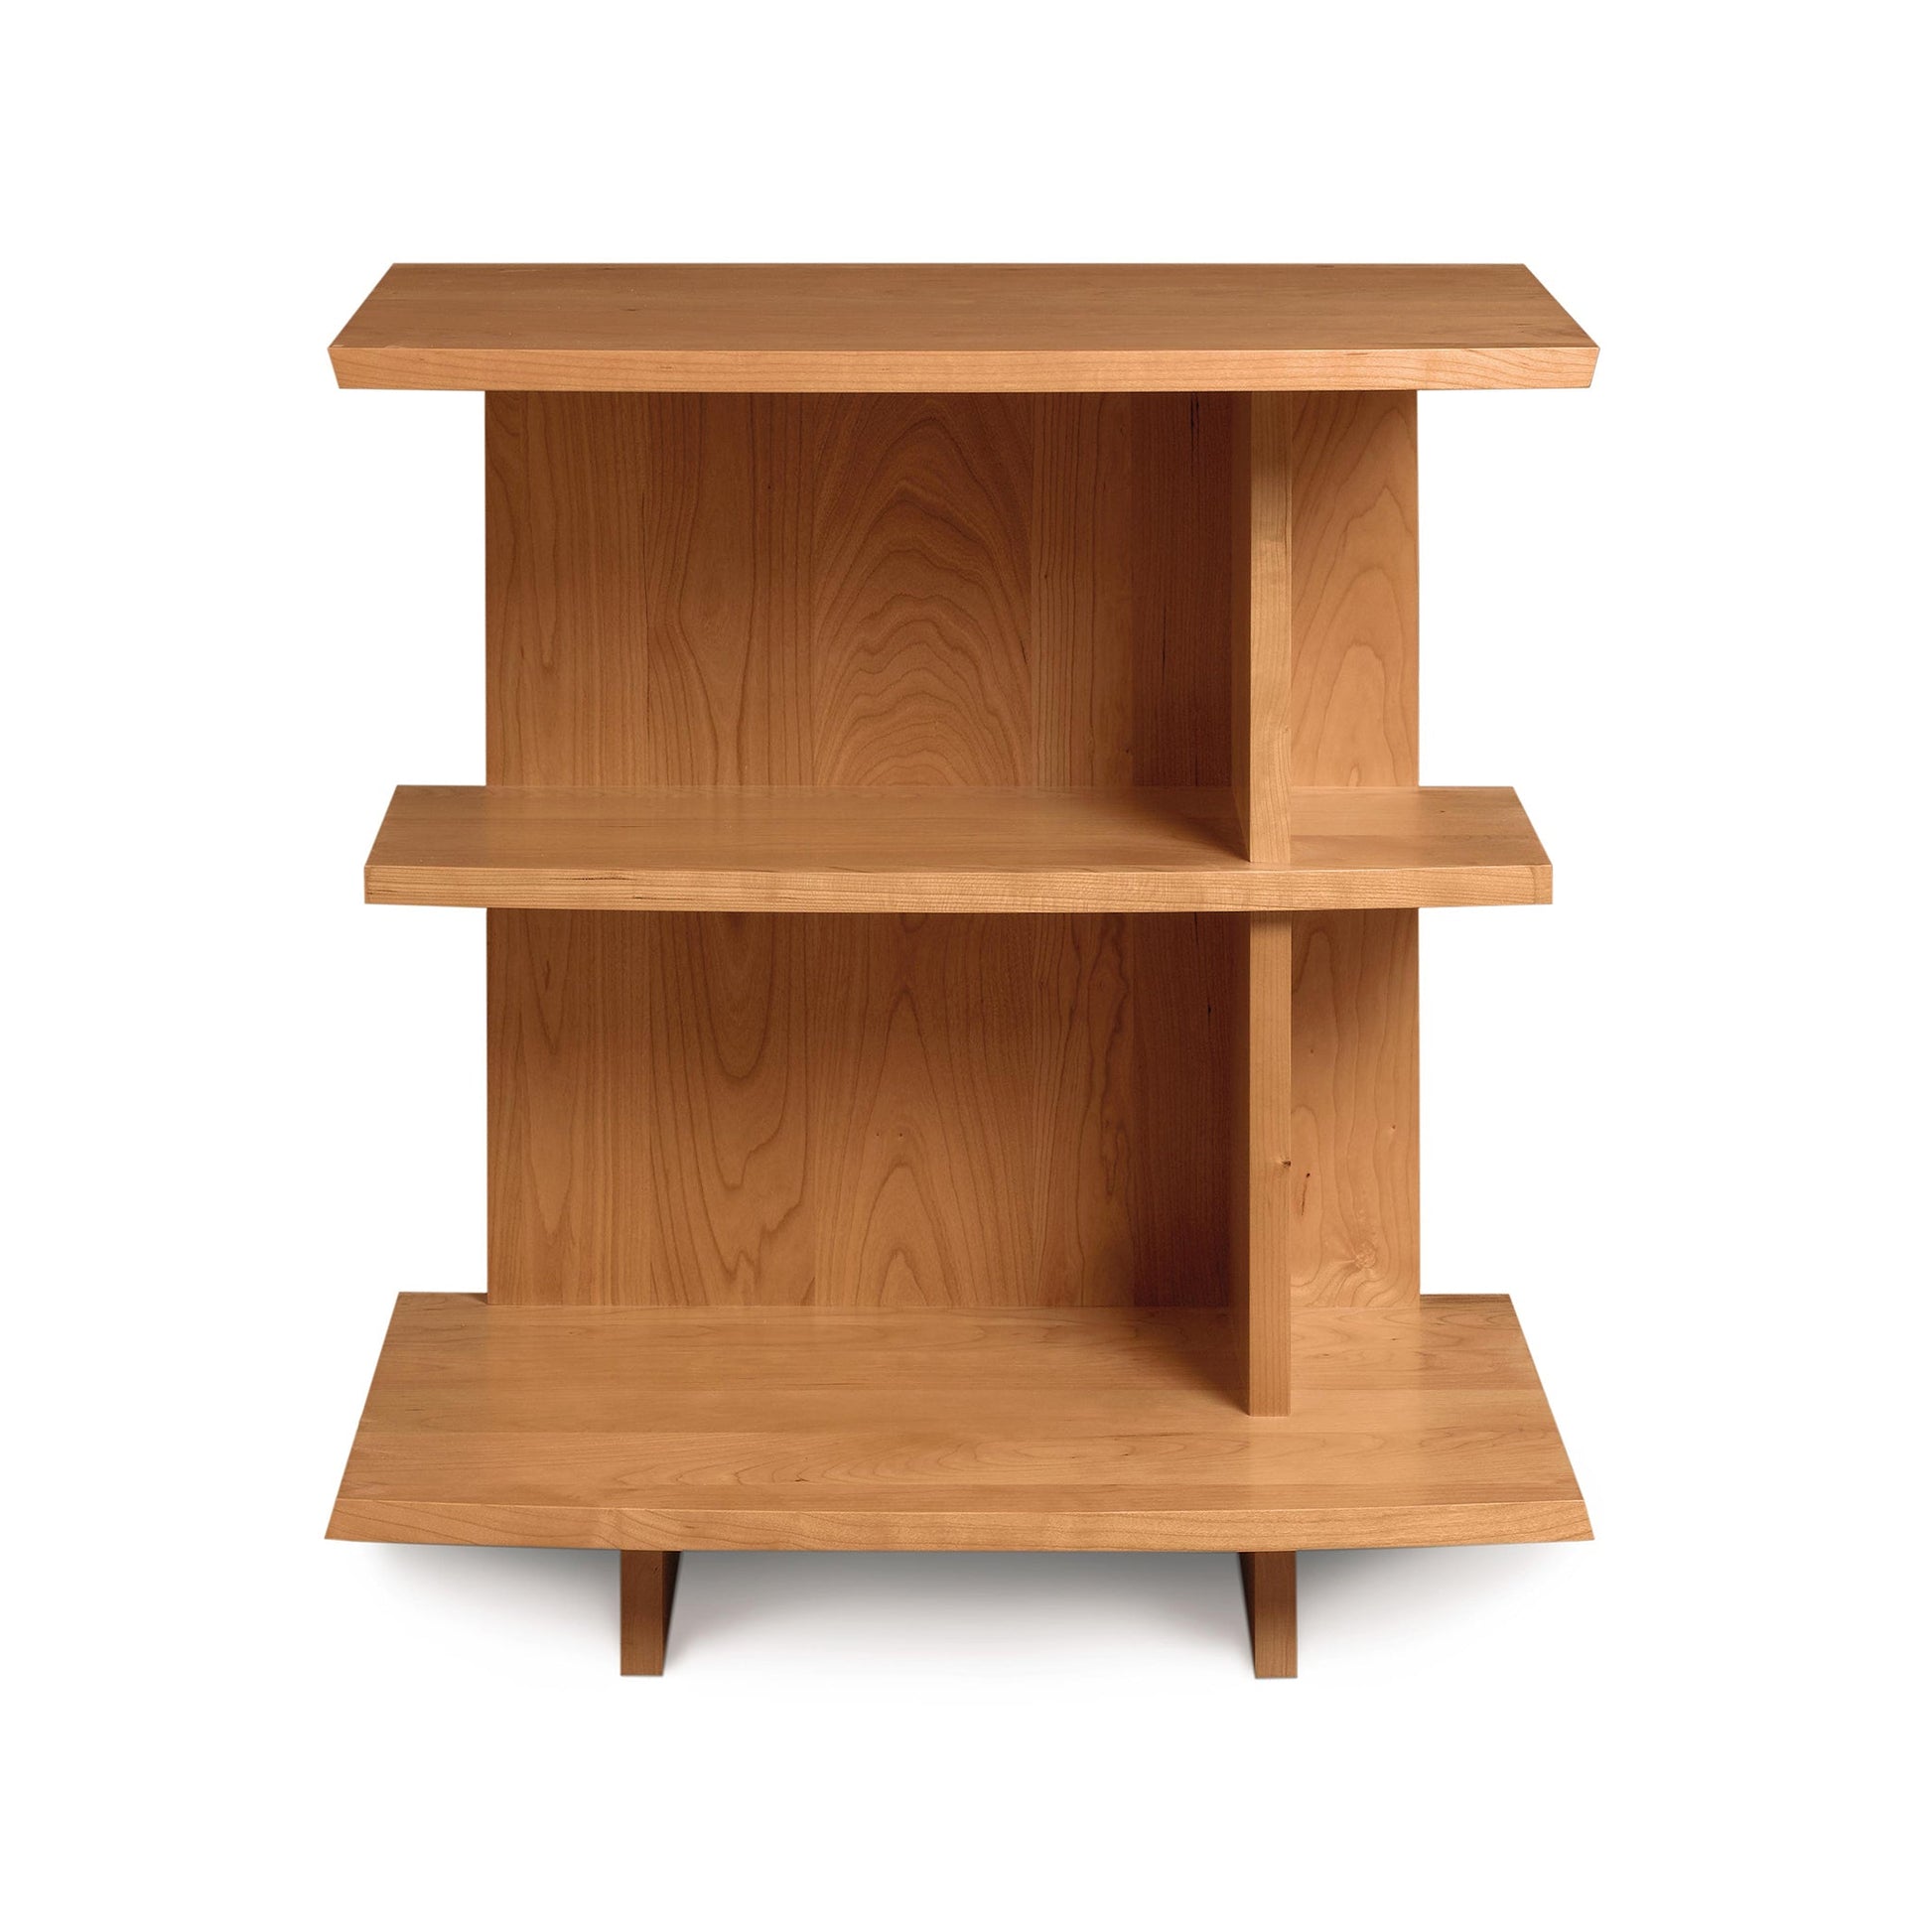 A wooden shelf on a white background.